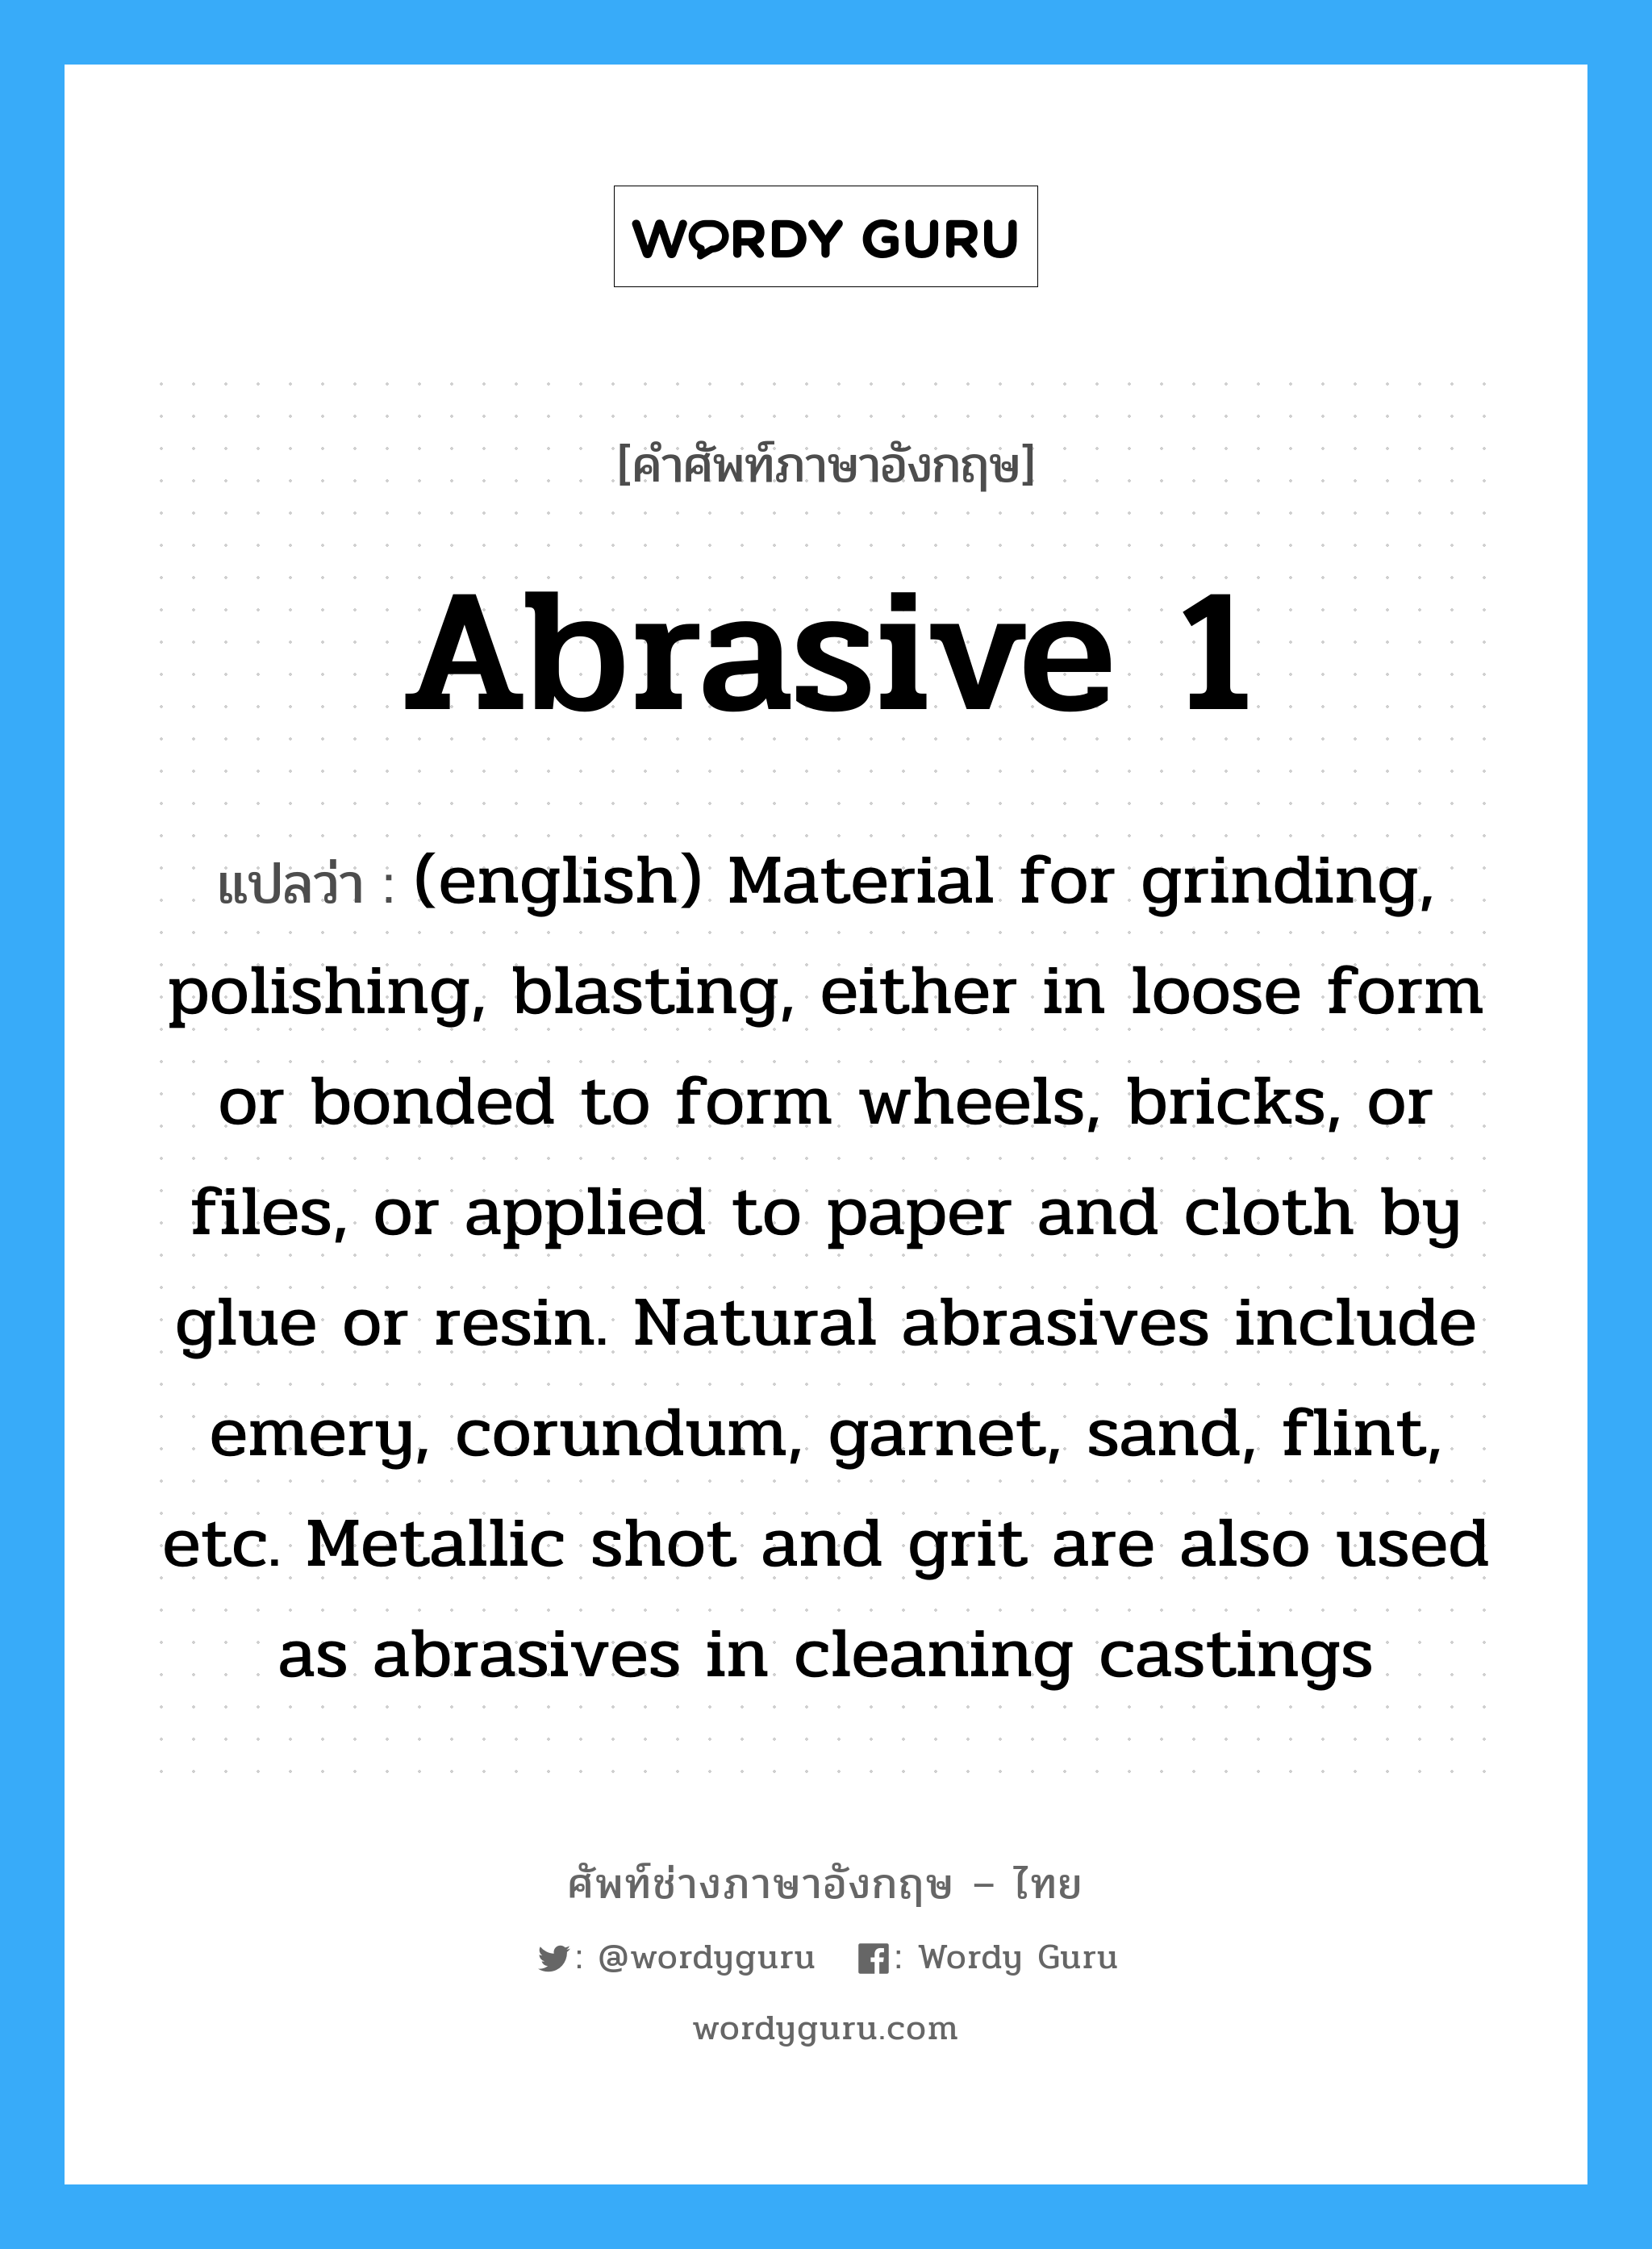 (english) Material for grinding, polishing, blasting, either in loose form or bonded to form wheels, bricks, or files, or applied to paper and cloth by glue or resin. Natural abrasives include emery, corundum, garnet, sand, flint, etc. Metallic shot and grit are also used as abrasives in cleaning castings ภาษาอังกฤษ?, คำศัพท์ช่างภาษาอังกฤษ - ไทย (english) Material for grinding, polishing, blasting, either in loose form or bonded to form wheels, bricks, or files, or applied to paper and cloth by glue or resin. Natural abrasives include emery, corundum, garnet, sand, flint, etc. Metallic shot and grit are also used as abrasives in cleaning castings คำศัพท์ภาษาอังกฤษ (english) Material for grinding, polishing, blasting, either in loose form or bonded to form wheels, bricks, or files, or applied to paper and cloth by glue or resin. Natural abrasives include emery, corundum, garnet, sand, flint, etc. Metallic shot and grit are also used as abrasives in cleaning castings แปลว่า Abrasive 1